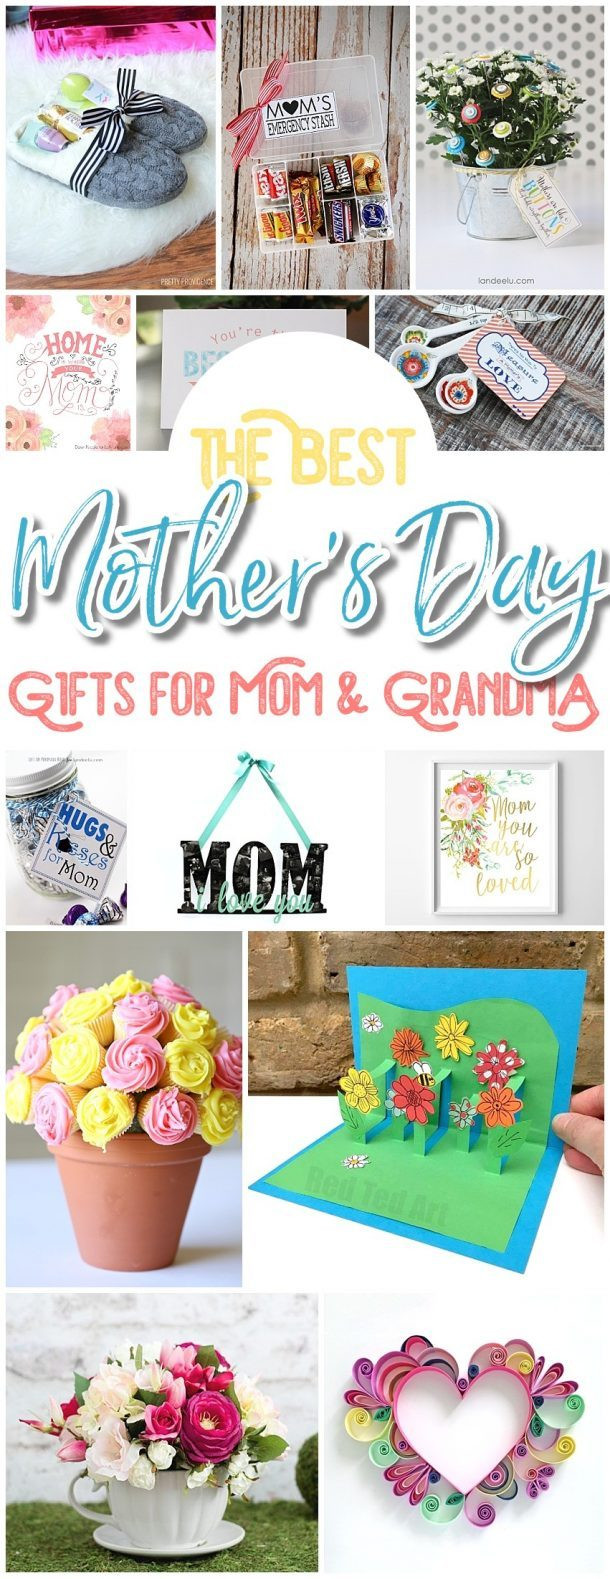 Christmas Crafts For Moms
 The BEST Easy DIY Mother’s Day Gifts and Treats Ideas